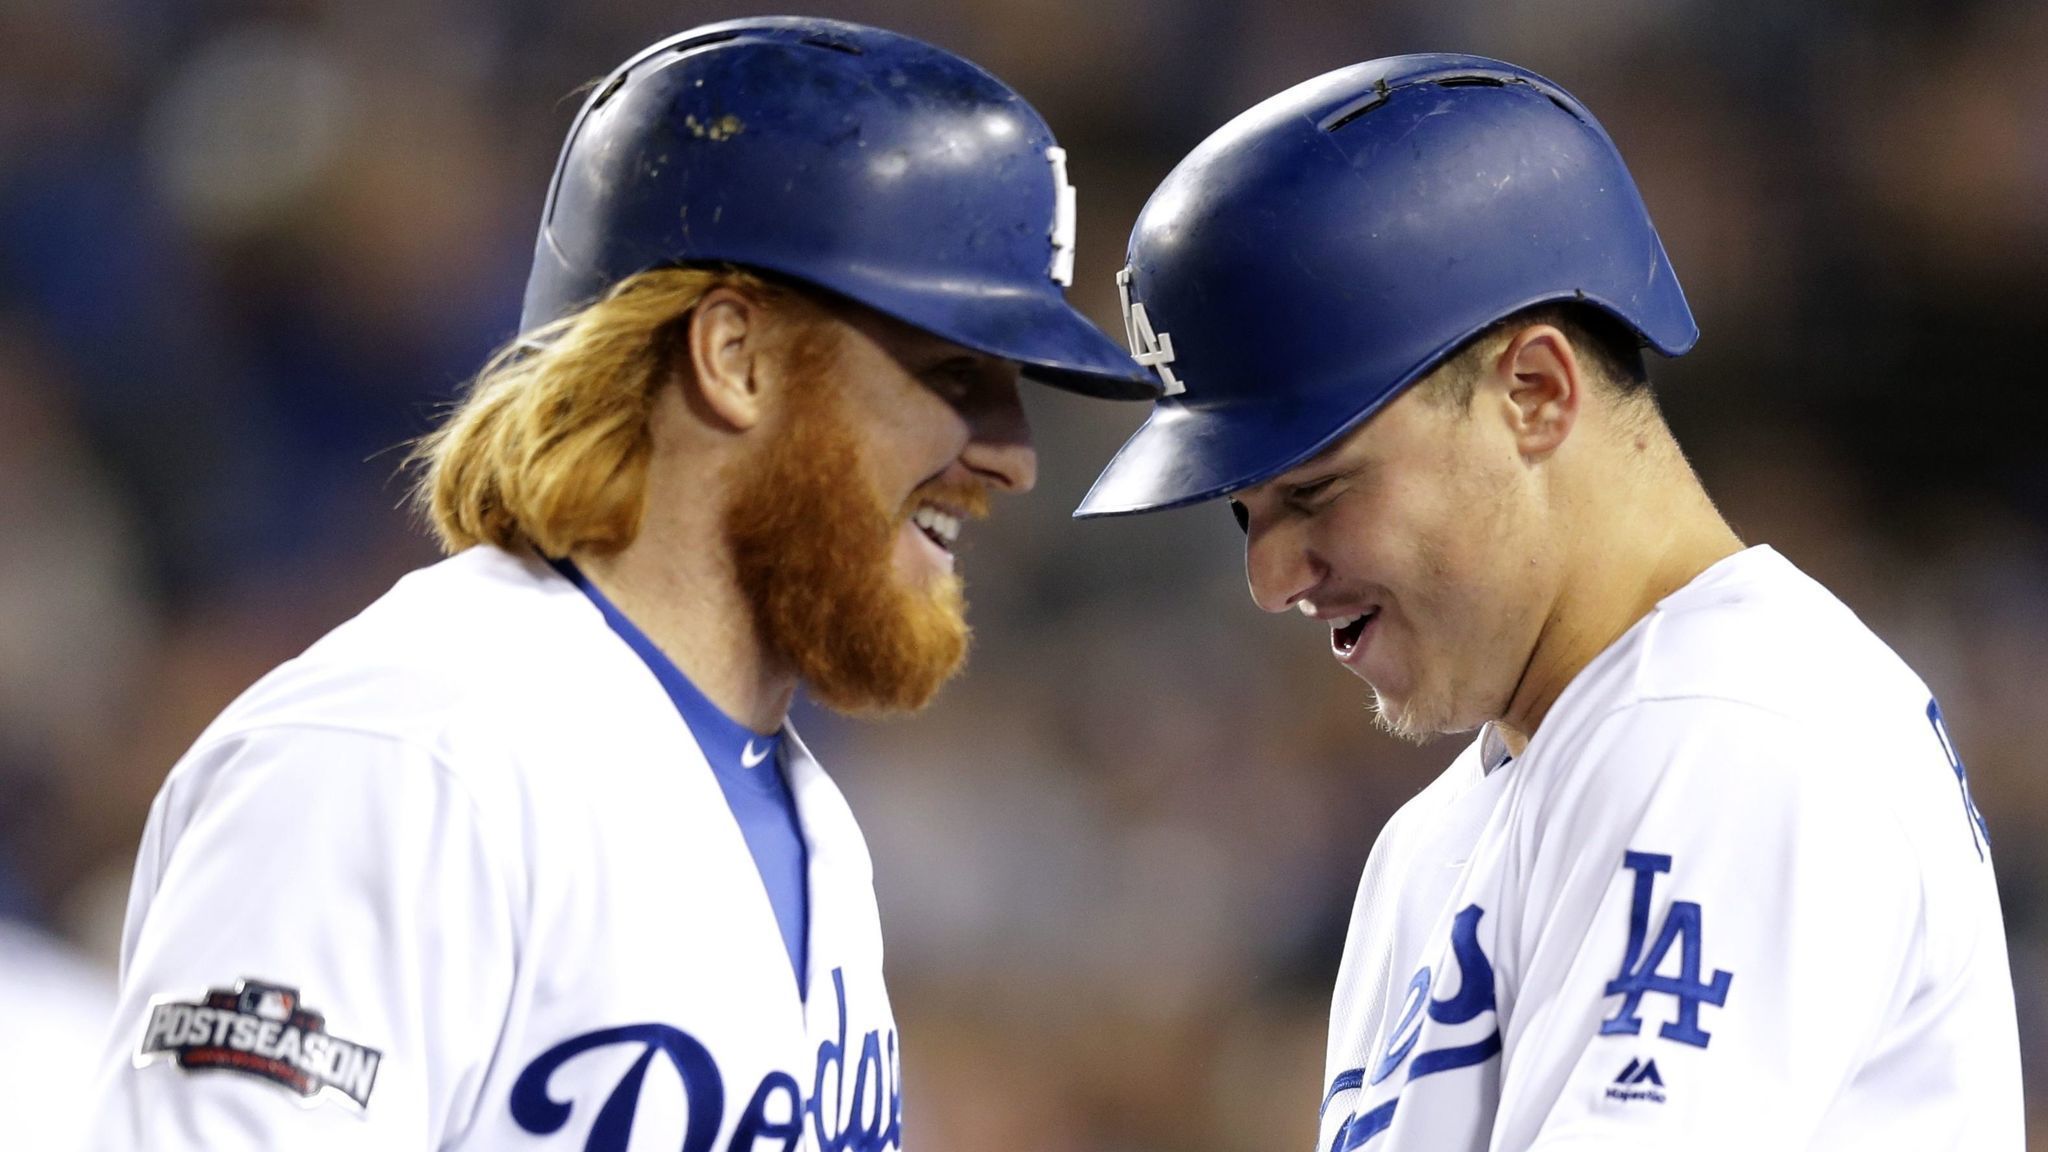 As World Series drought approaches 30 years, Dodgers stand firm in their future - LA Times